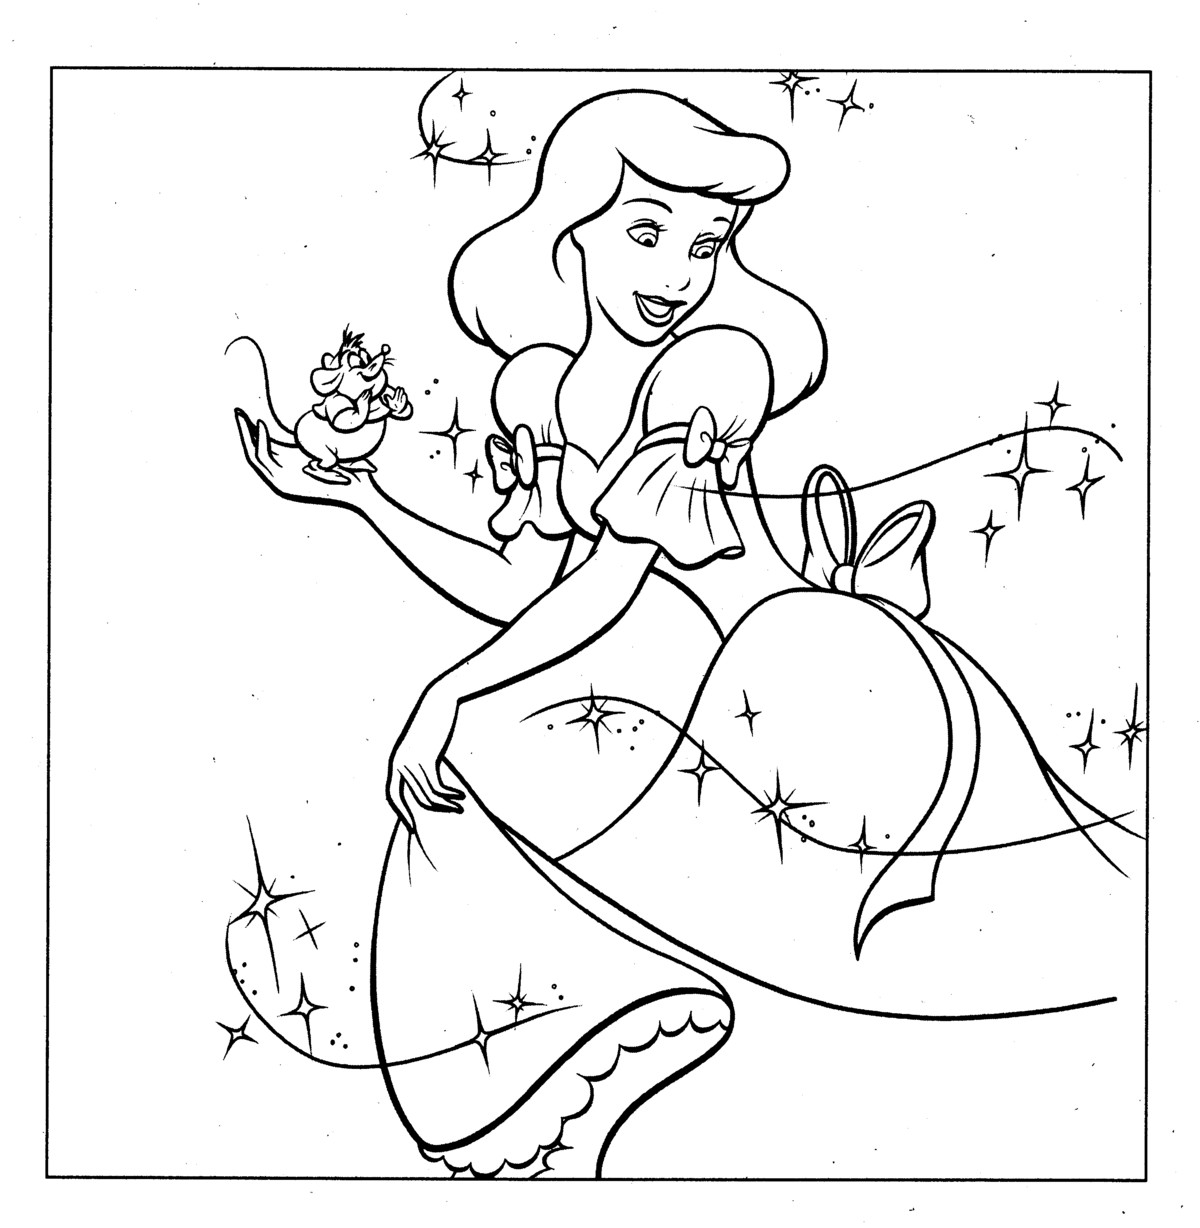 Princess Cinderella Coloring Pages Ideas BEDECOR Free Coloring Picture wallpaper give a chance to color on the wall without getting in trouble! Fill the walls of your home or office with stress-relieving [bedroomdecorz.blogspot.com]